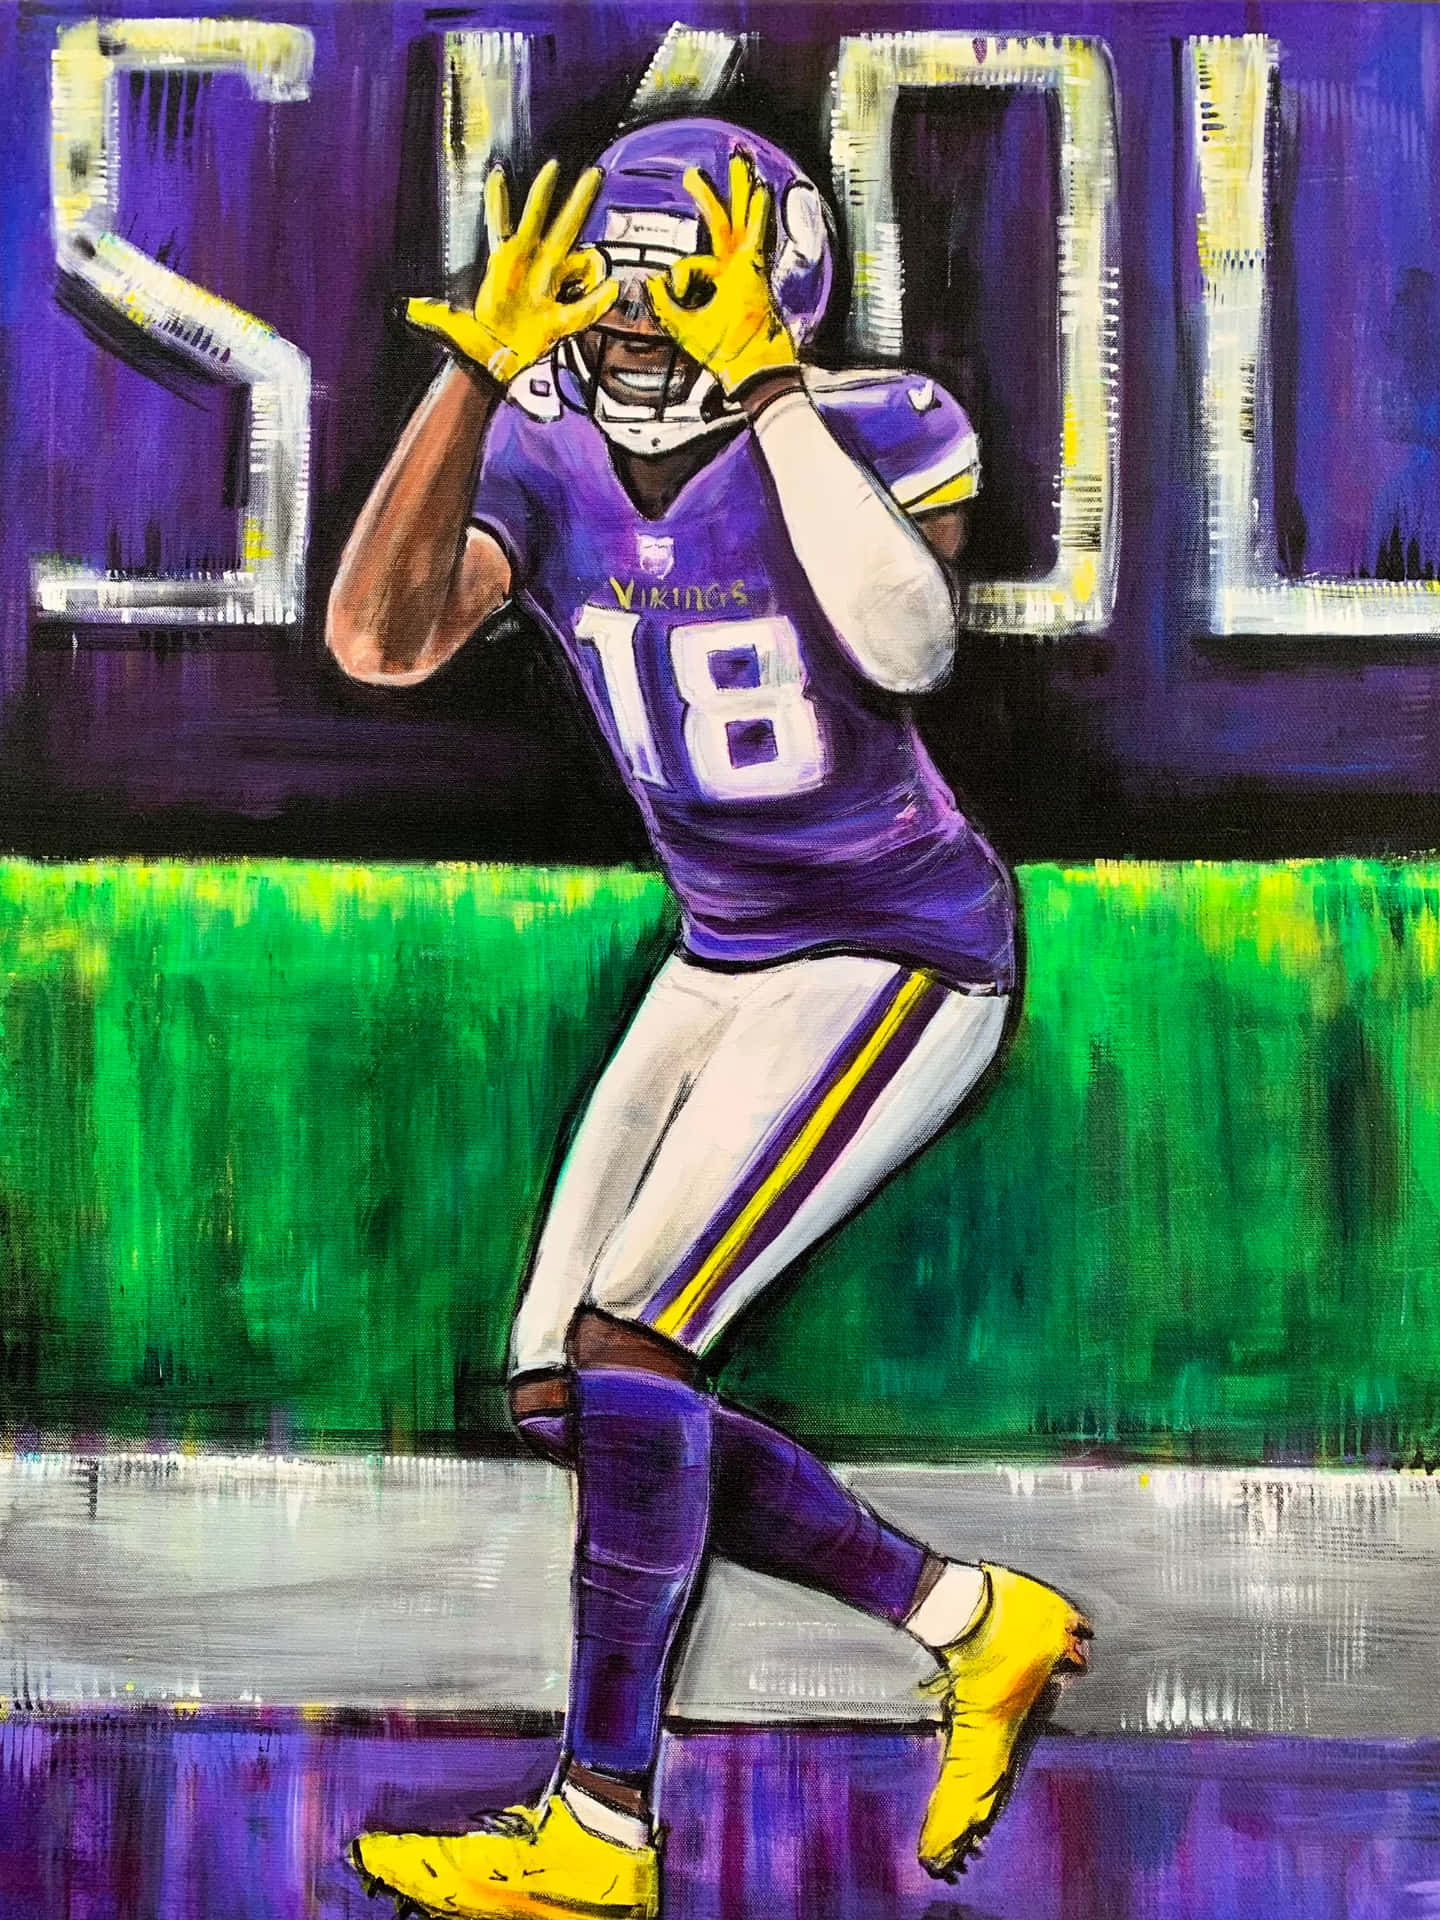 Vikings Player Griddy Dance Painting Wallpaper